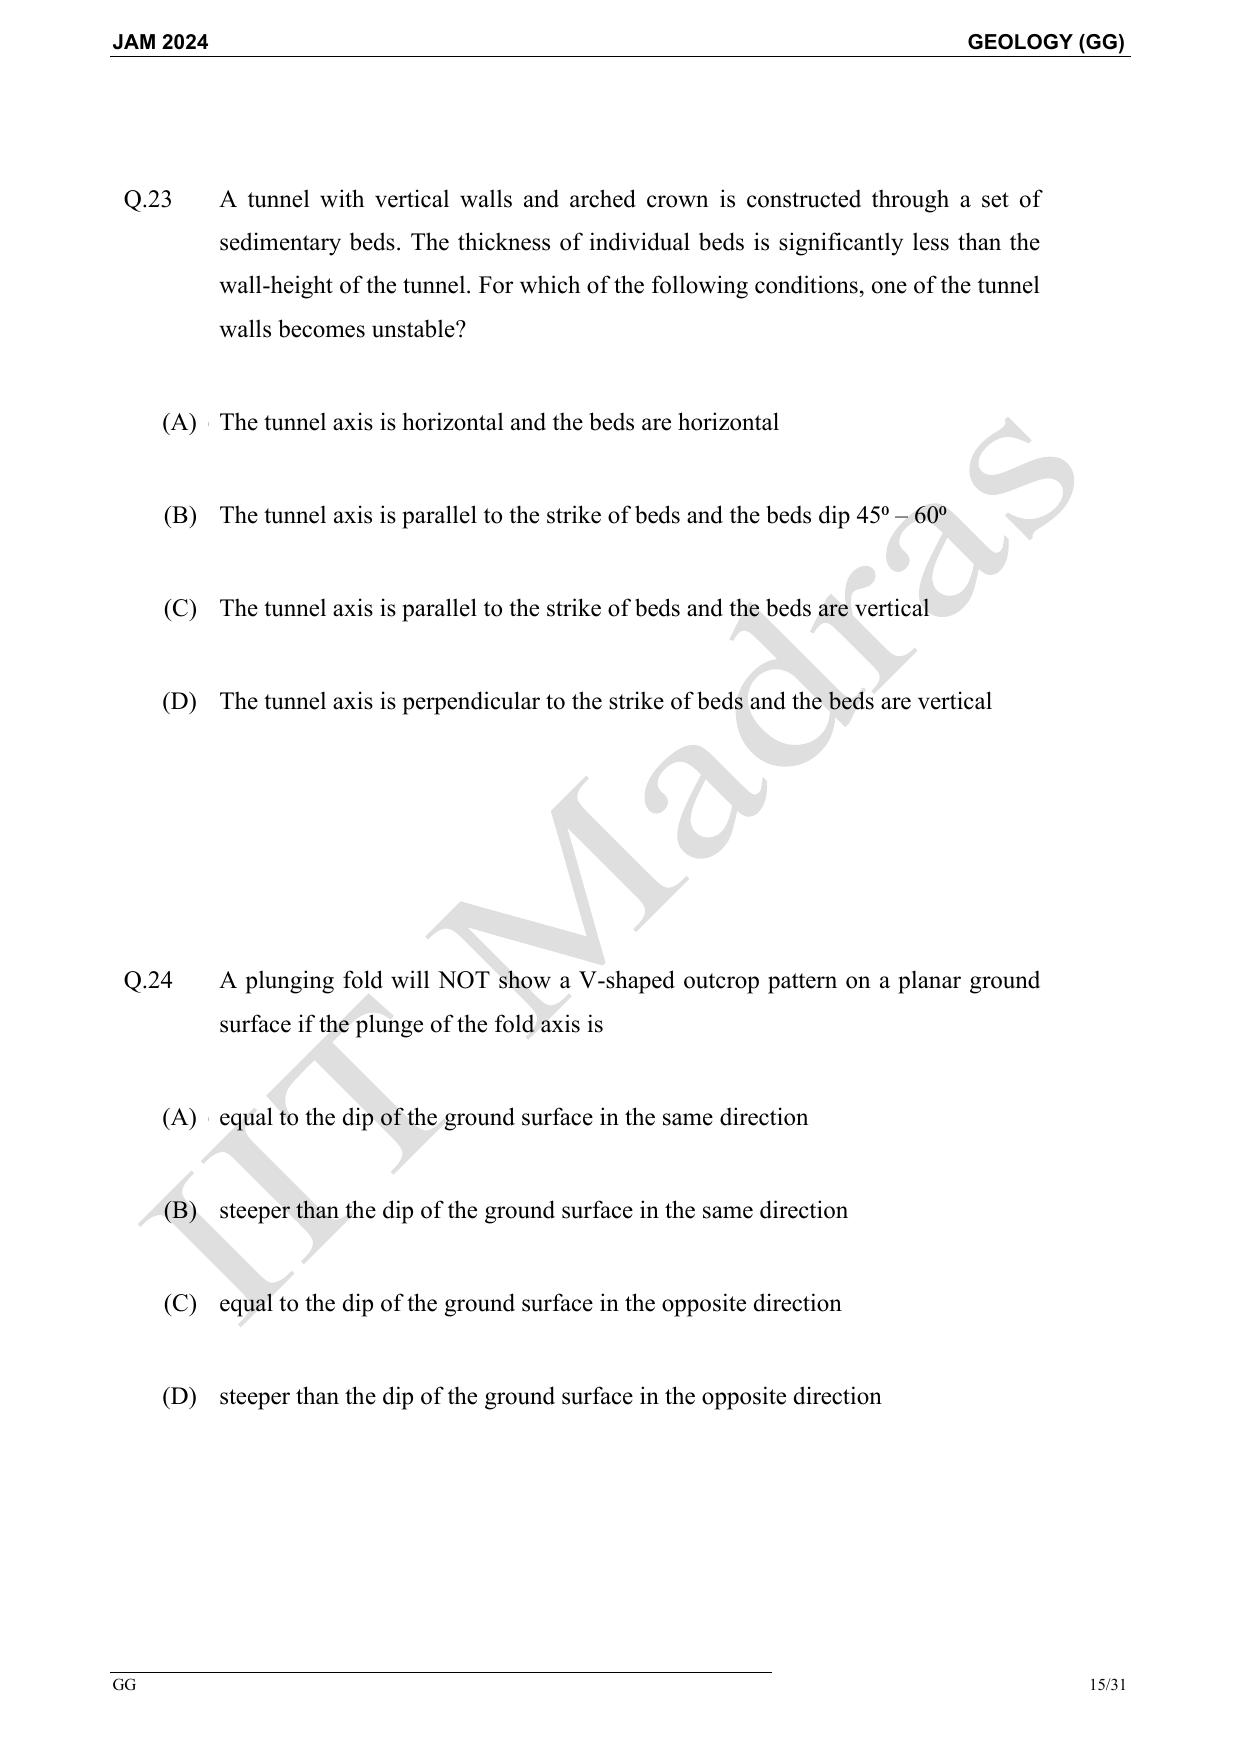 IIT JAM 2024 Geology (GG) Master Question Paper - Page 15